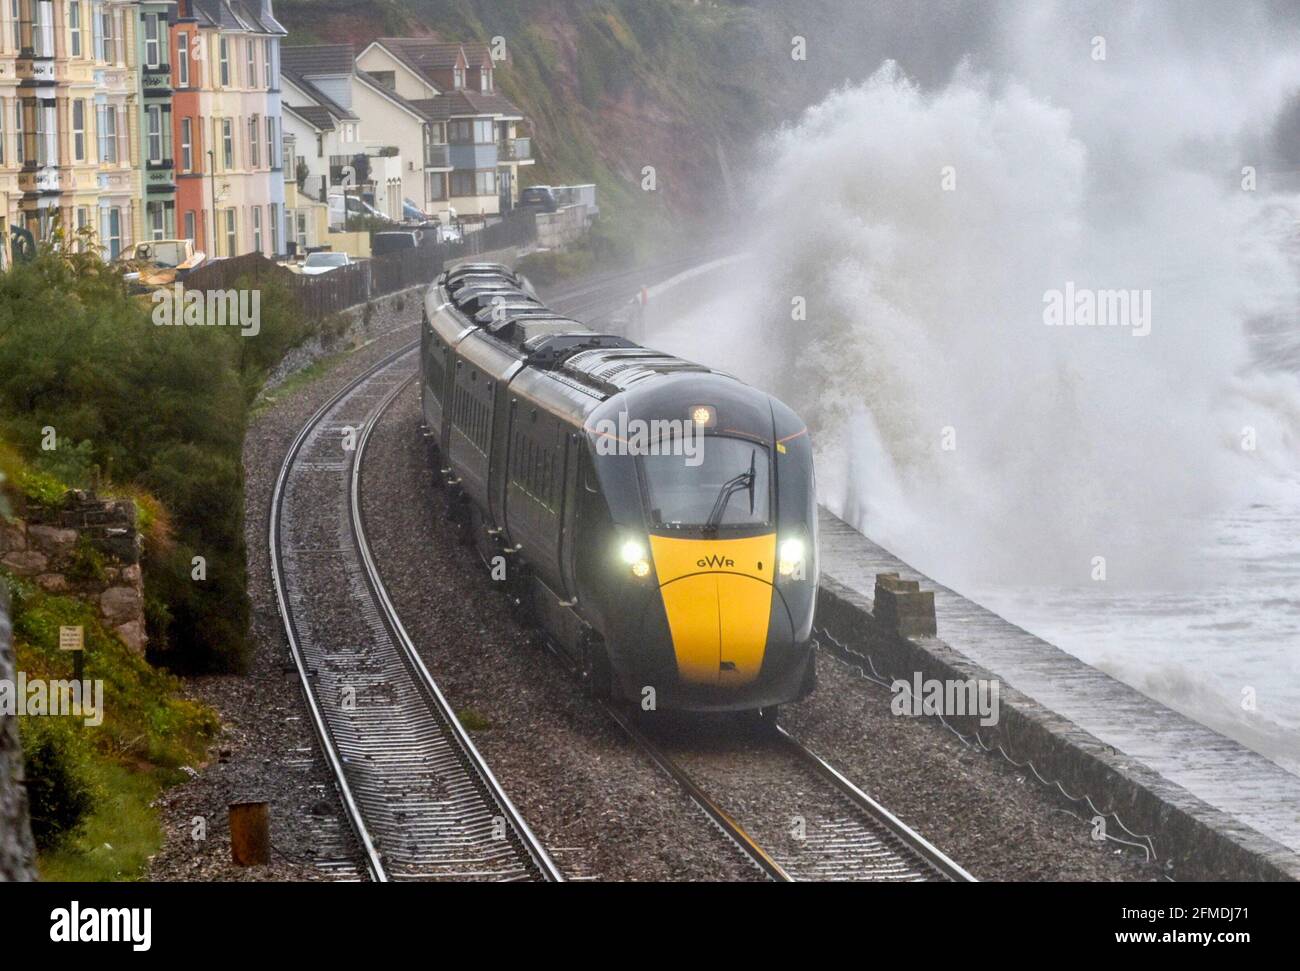 A Great western Railways Hitatchi Class 800 train passes along the refurbished Dawlish seawall, during stormy weather. GWR. Stock Photo